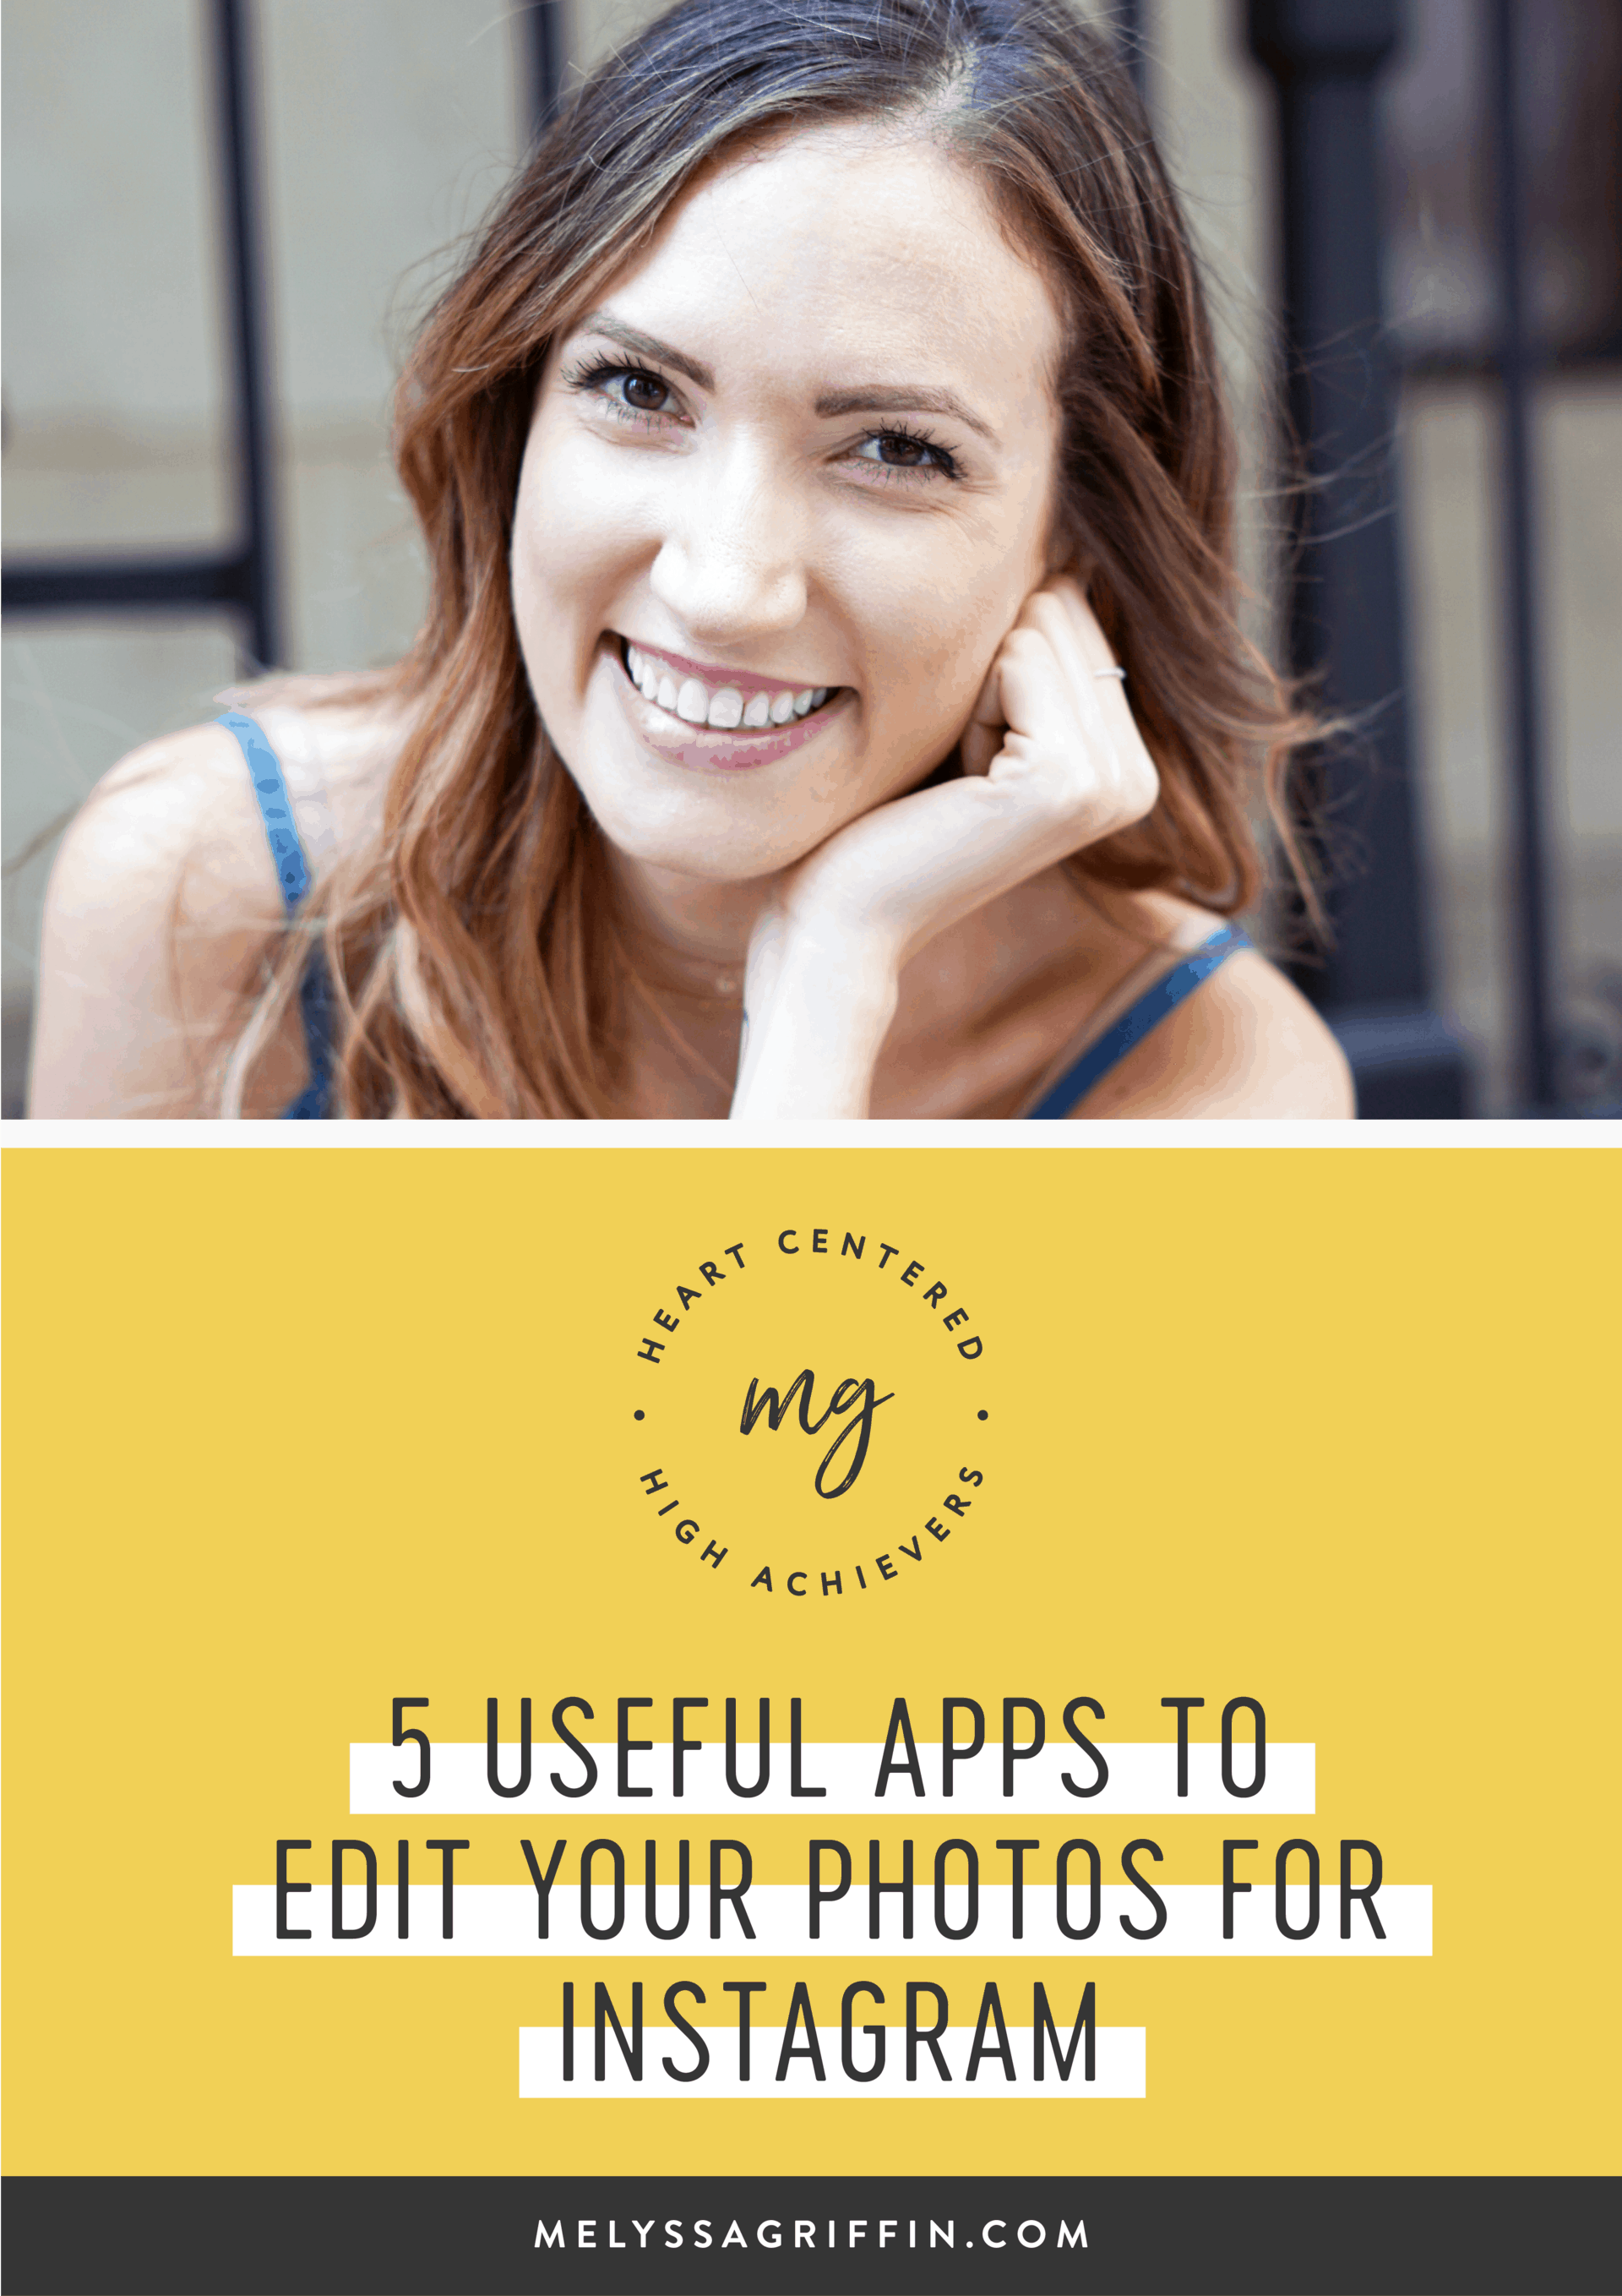 5 Useful Apps To Edit Your Photos for Instagram - Melyssa Griffin